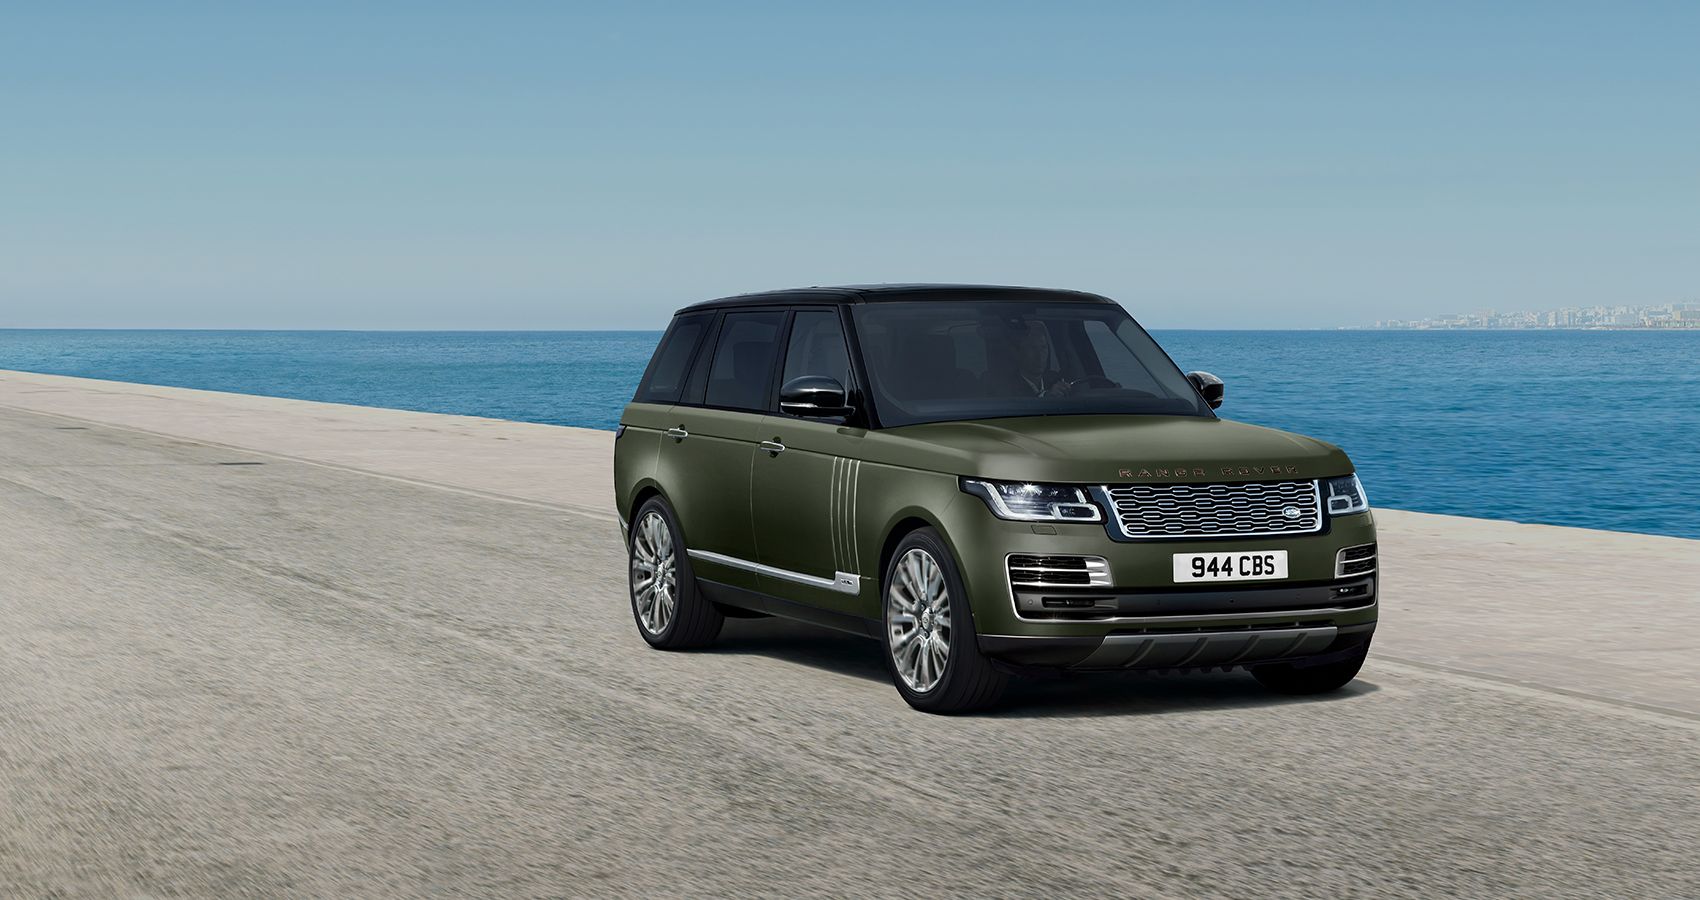 The front of the 2021 Range Rover SVAutobiography